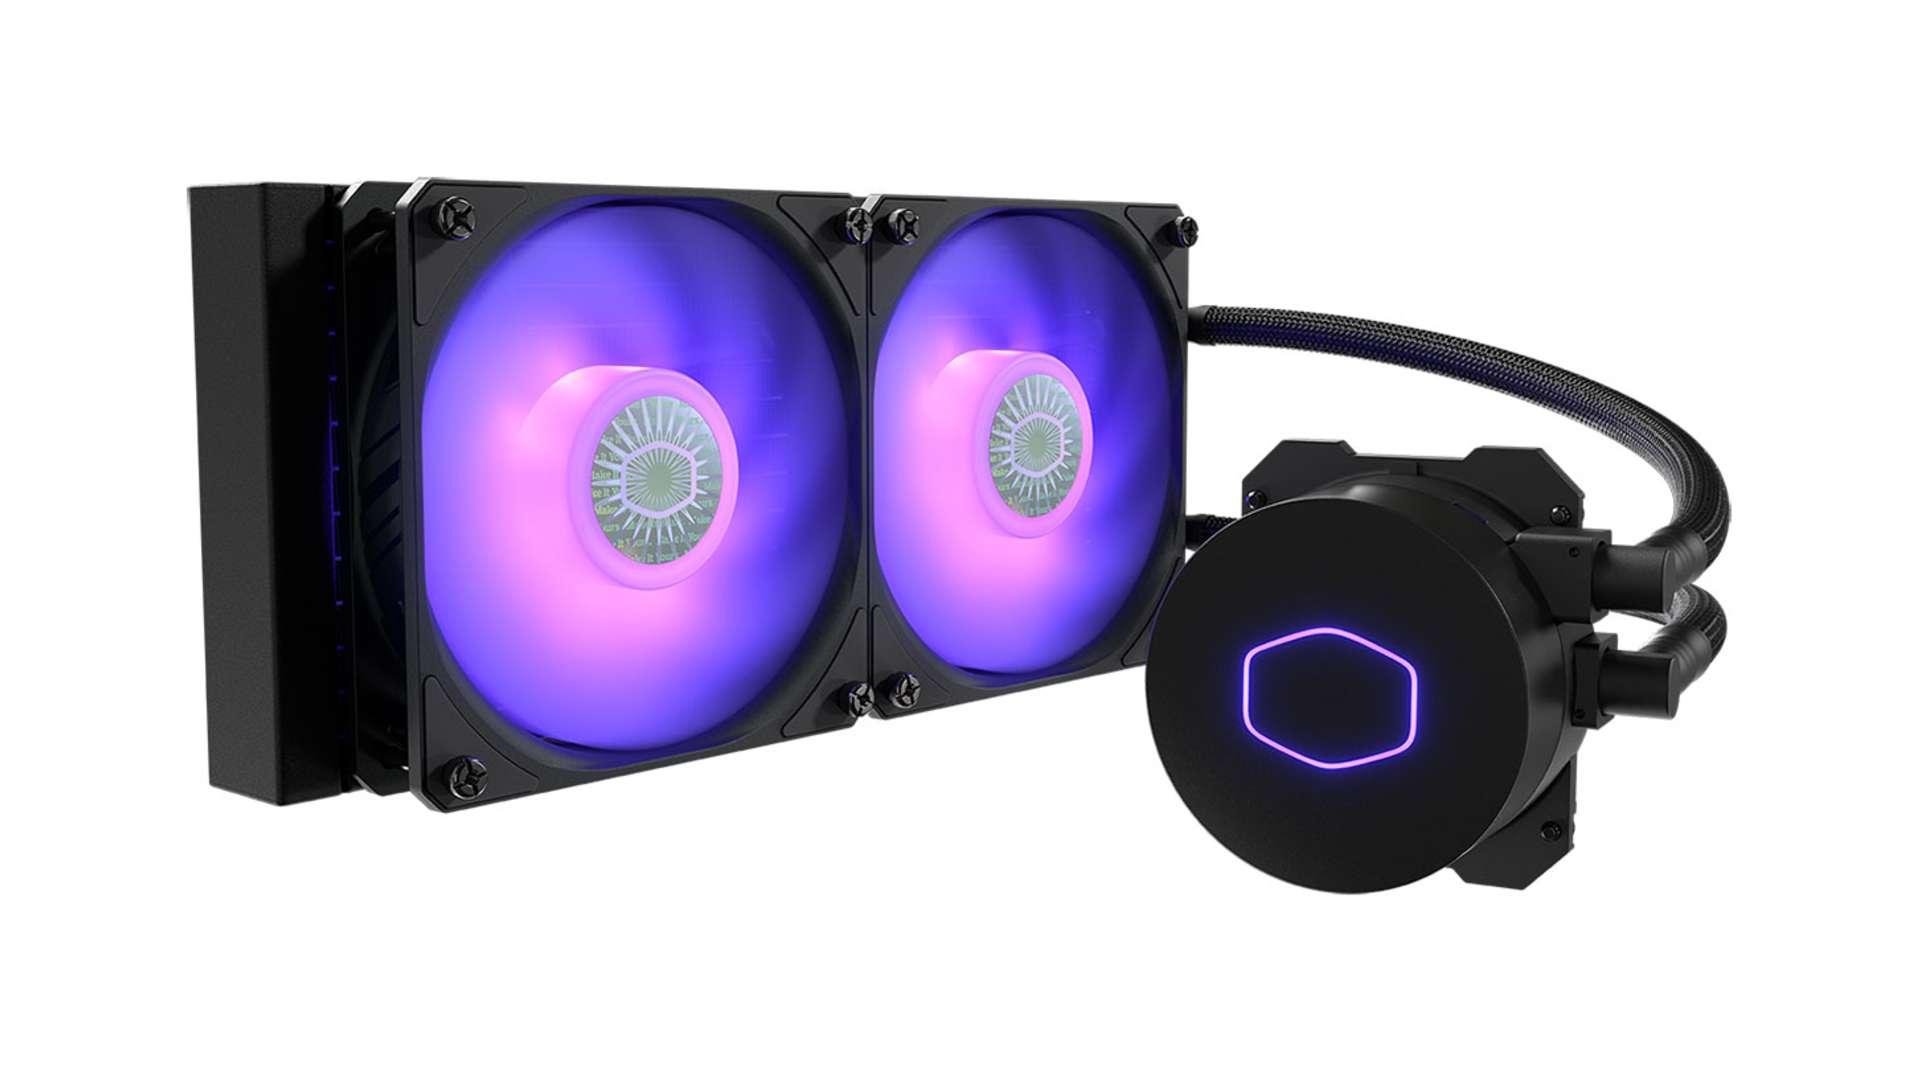 The Cooler Master MasterLiquid ML240L has purple fan lighting and the CM logo on the pump on a white background.